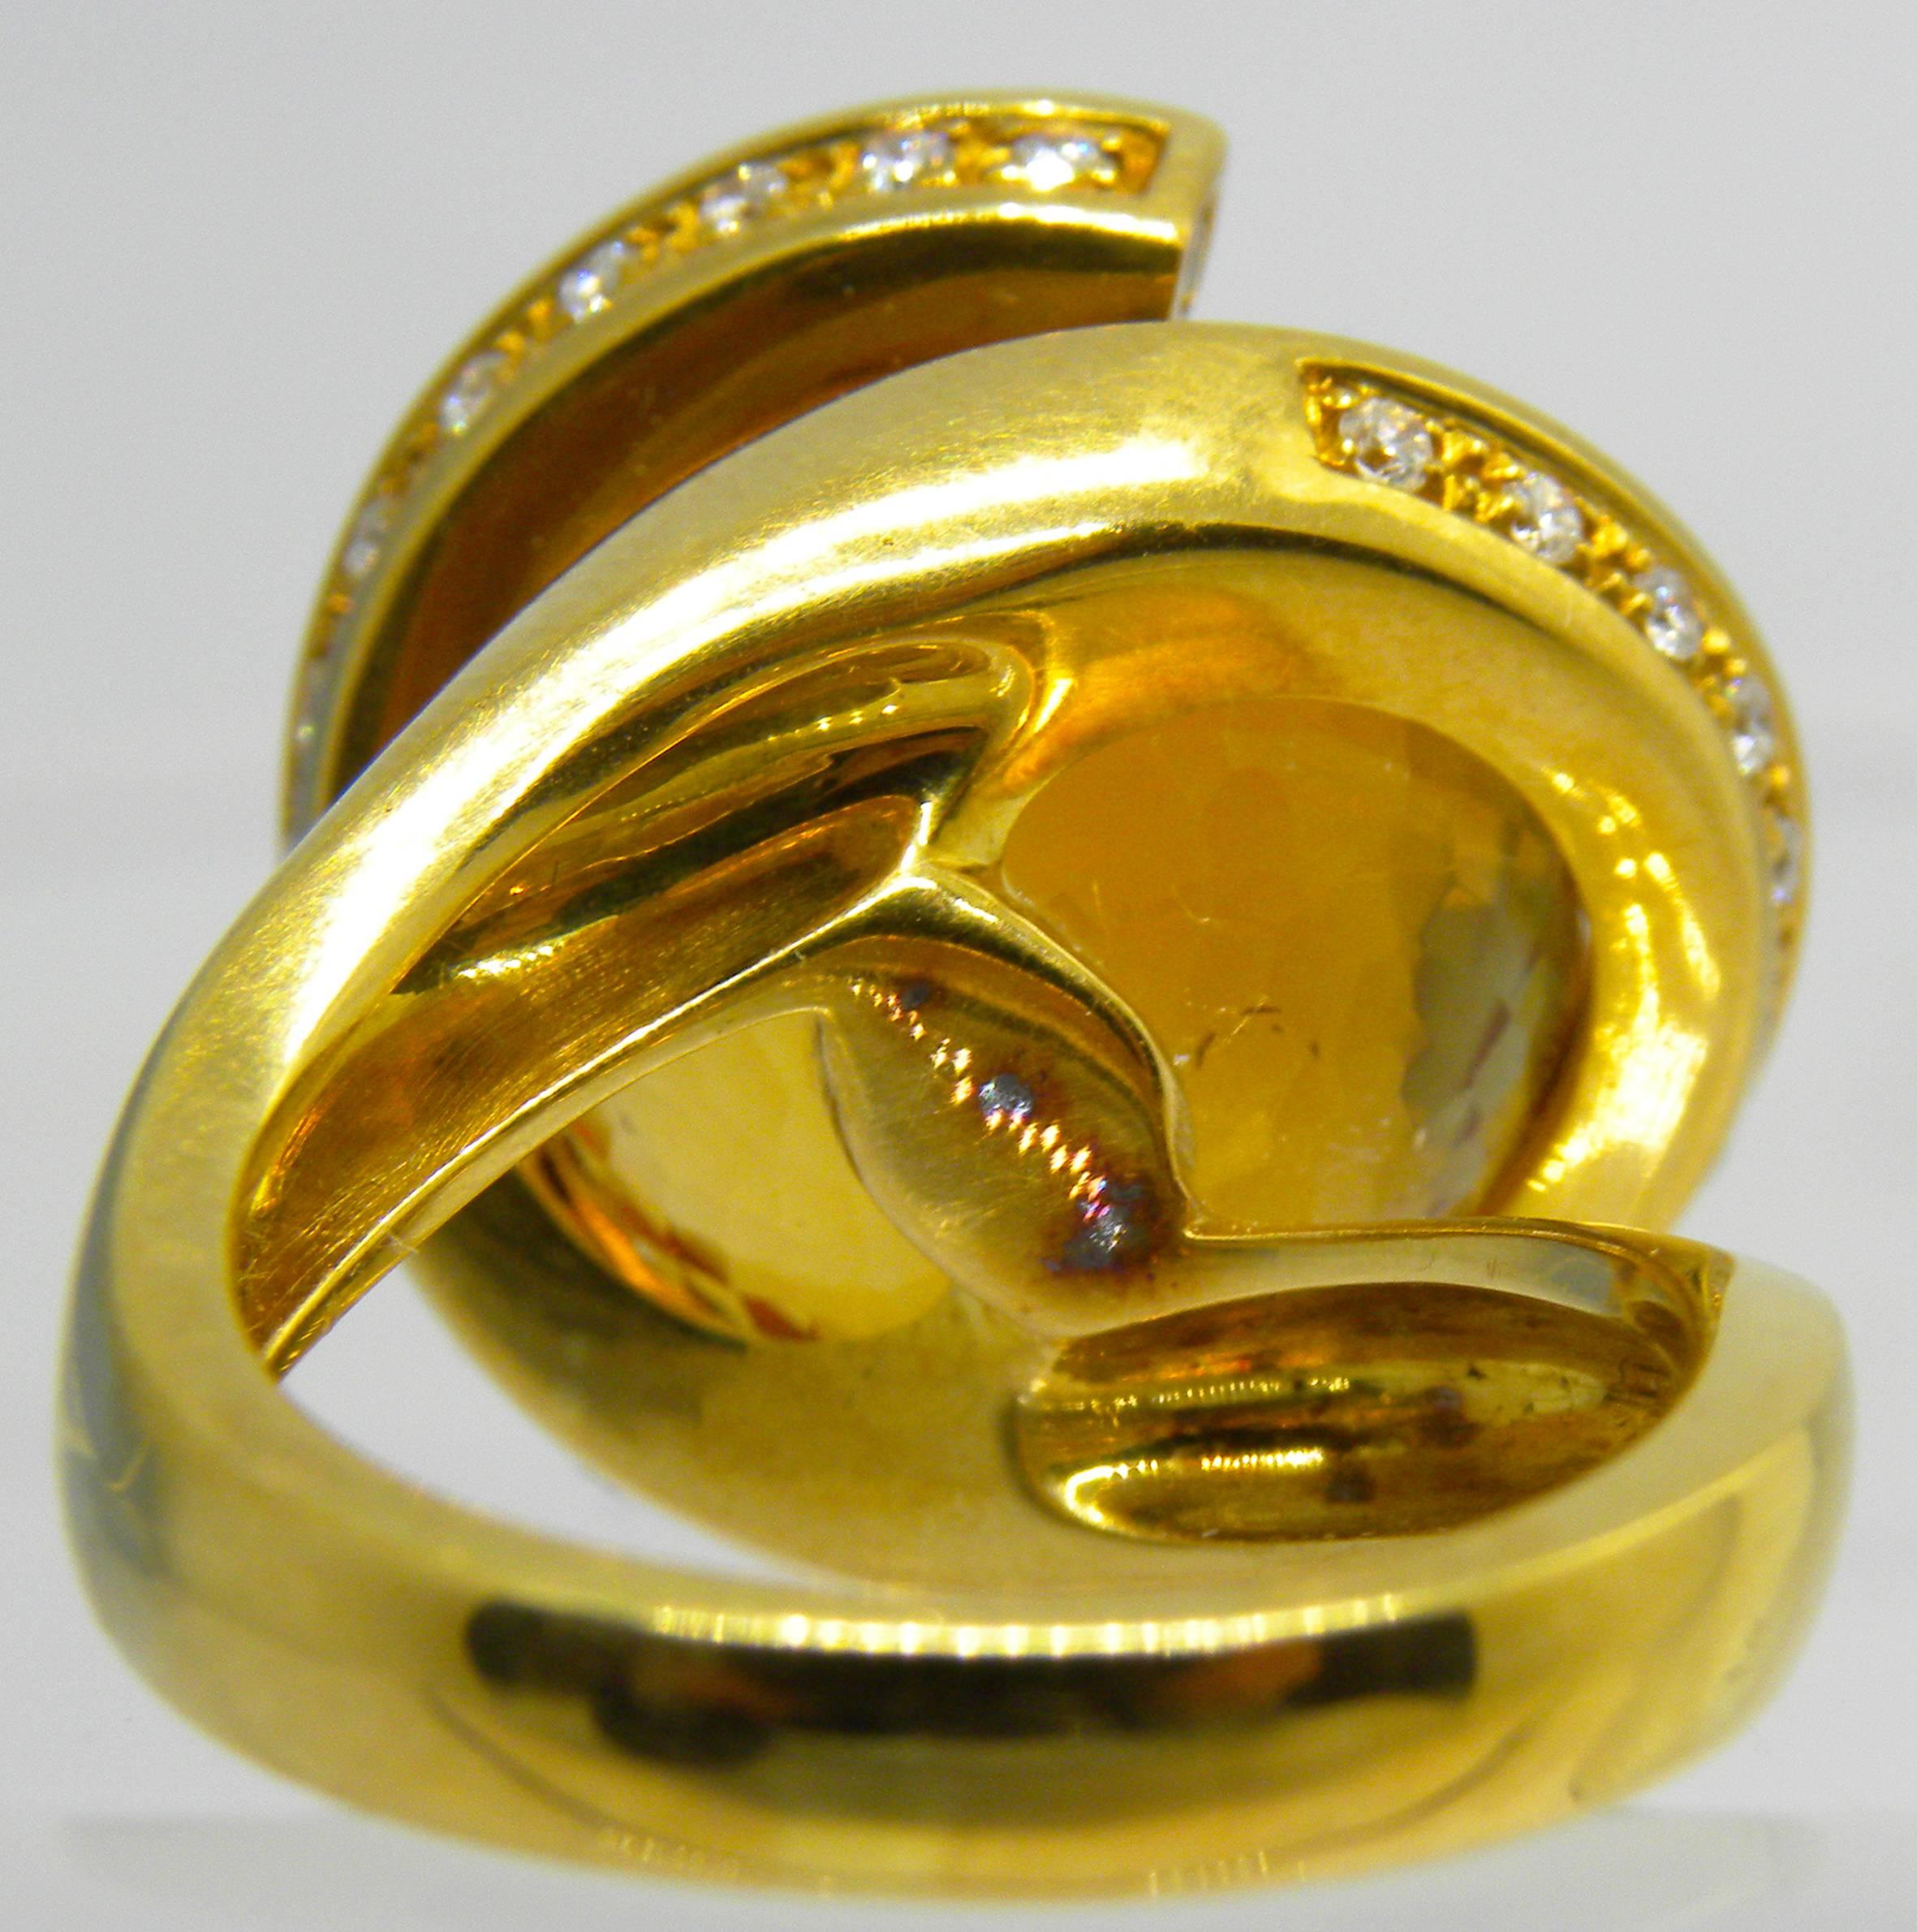 Iconic, Unique yet Timeless 25.70 Carat Natural Madeira Hand Inlaid, Hand Faceted Citrine Ball, diameter 0.59 inches(15mm), in a 0.65Kt White Diamond 18 Carat Yellow Gold Handcrafted and Sculptural Helix Setting.
In our fitted burgundy leather